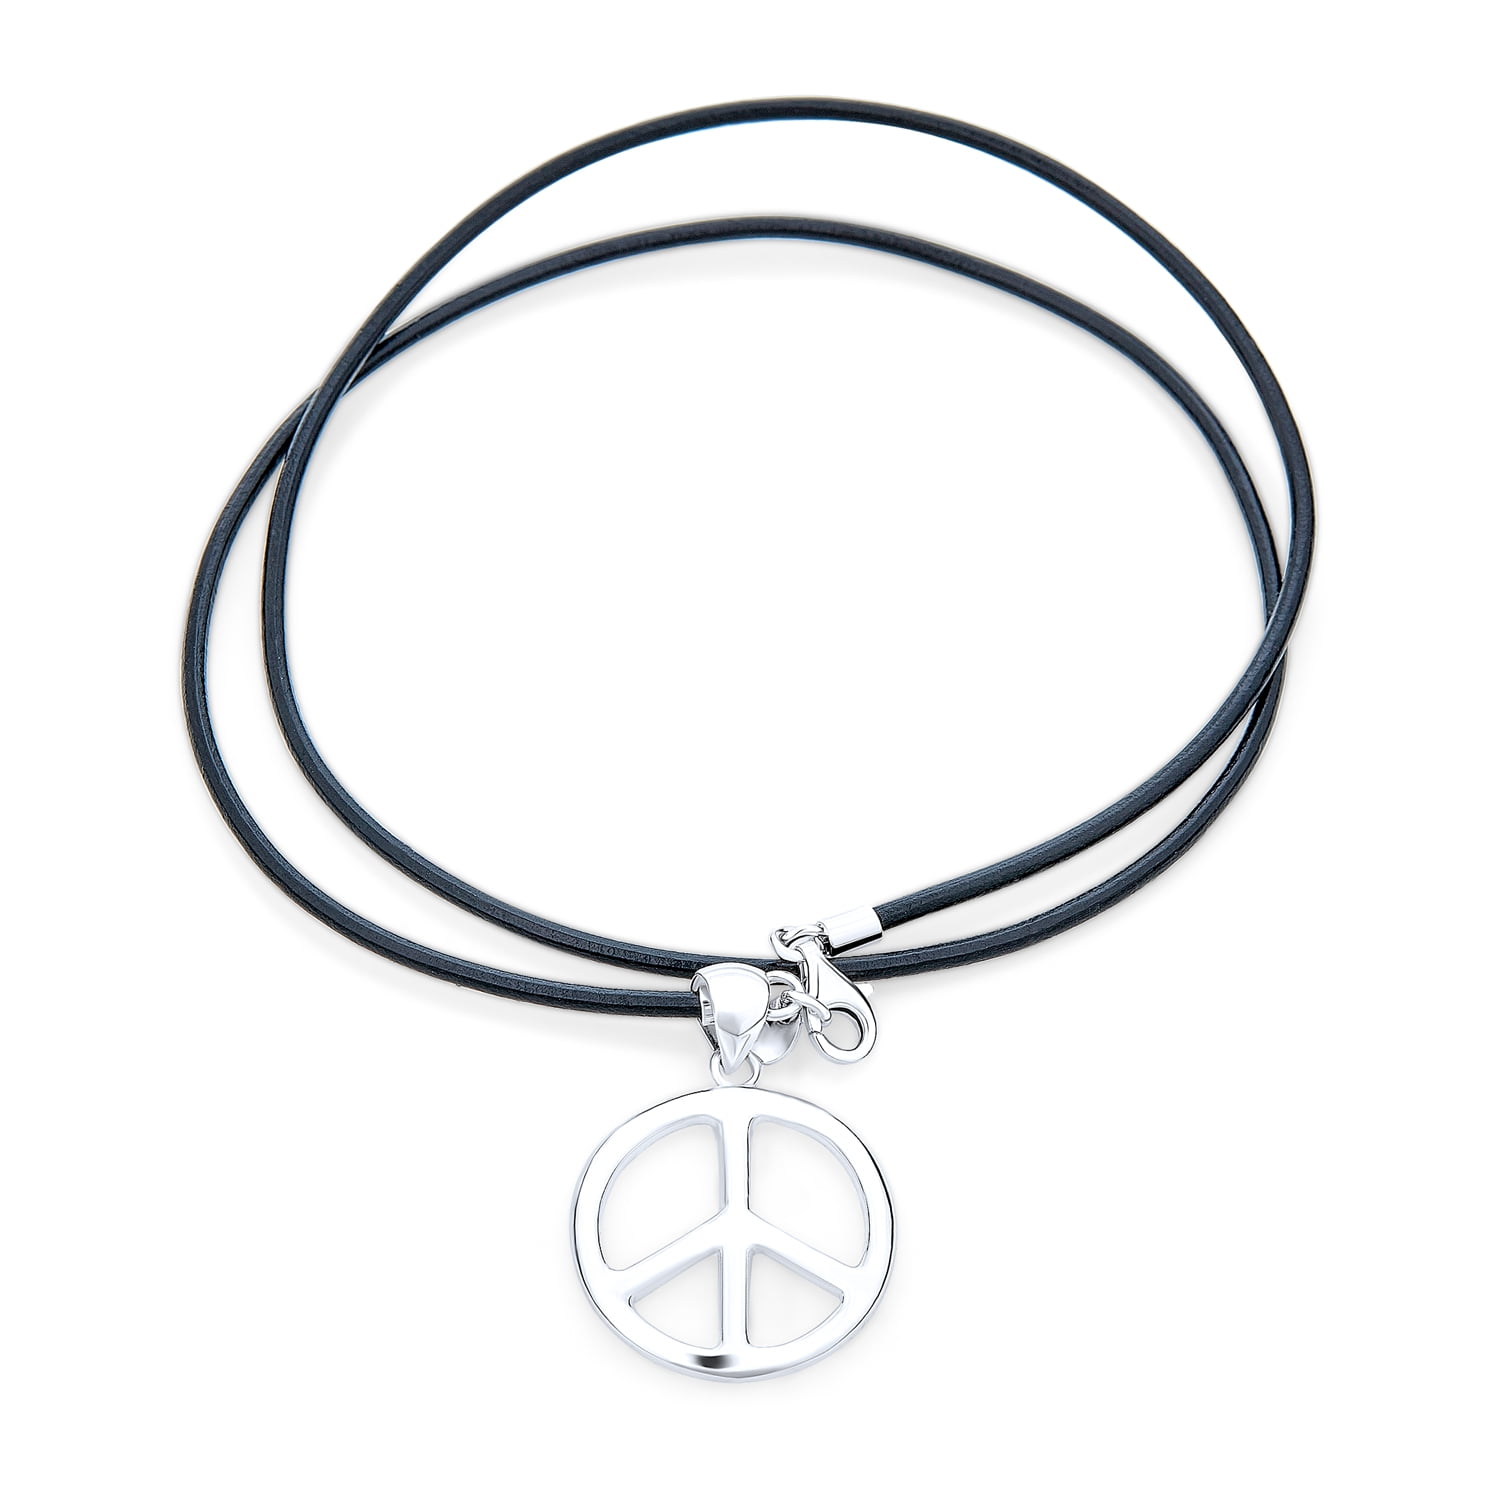 Shell Peace Sign Pendant Necklace Choker Charm with Black Cord